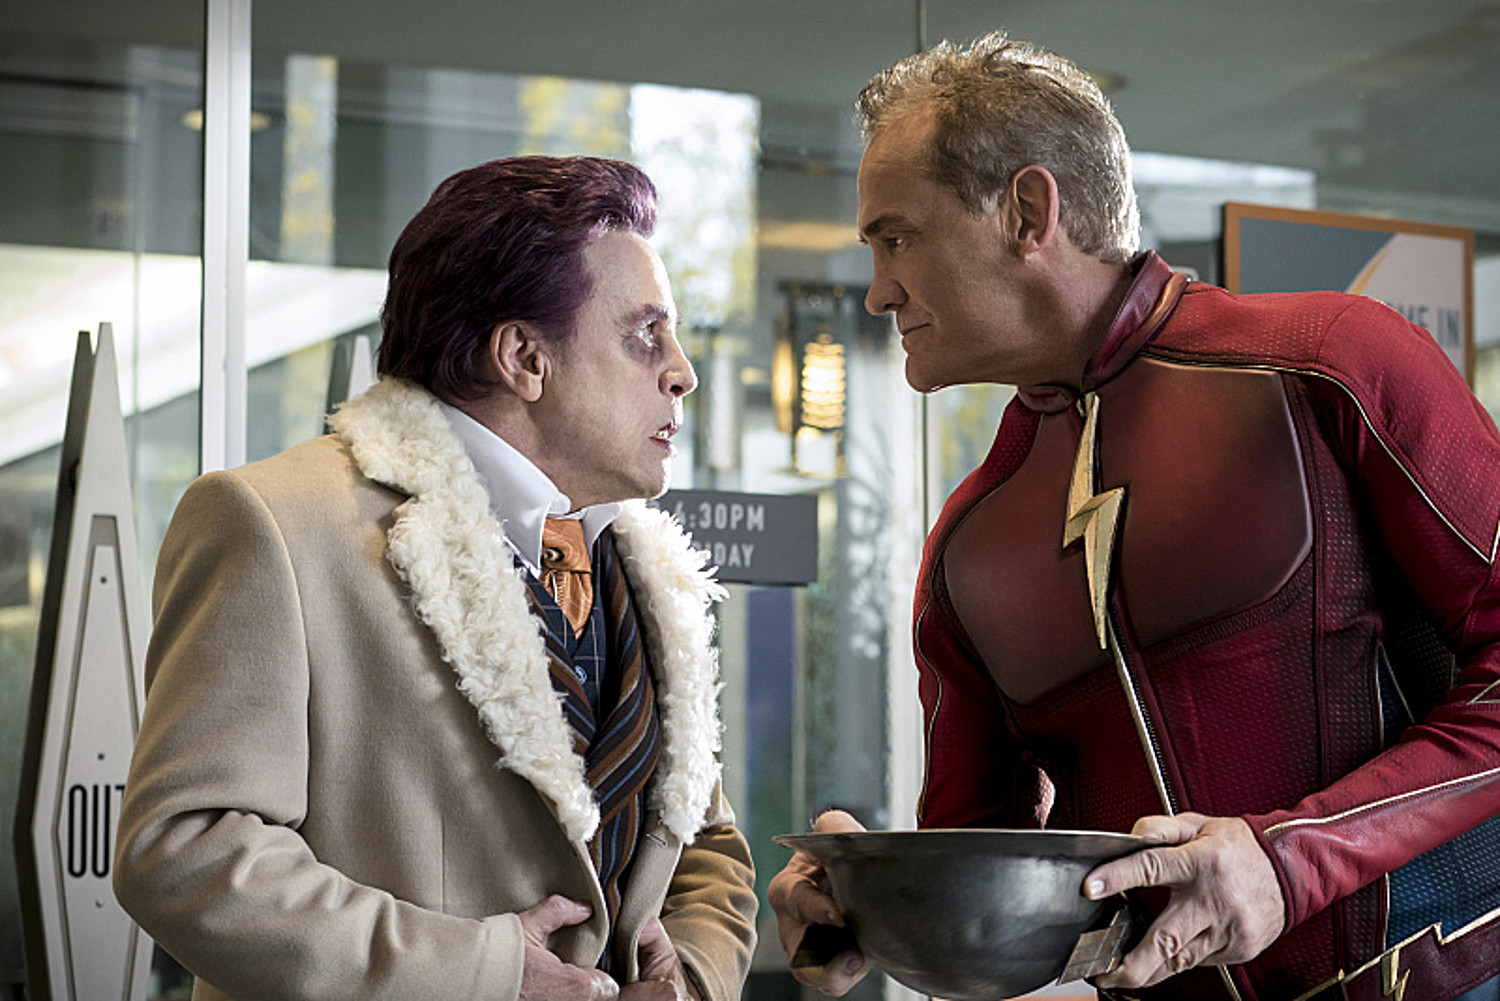 The Flash -- "The Present" -- Pictured (L-R) Mark Hamil as James Jesse and John Wesley Shipp as Jay Garrick -- Photo: Katie Yu/The CW